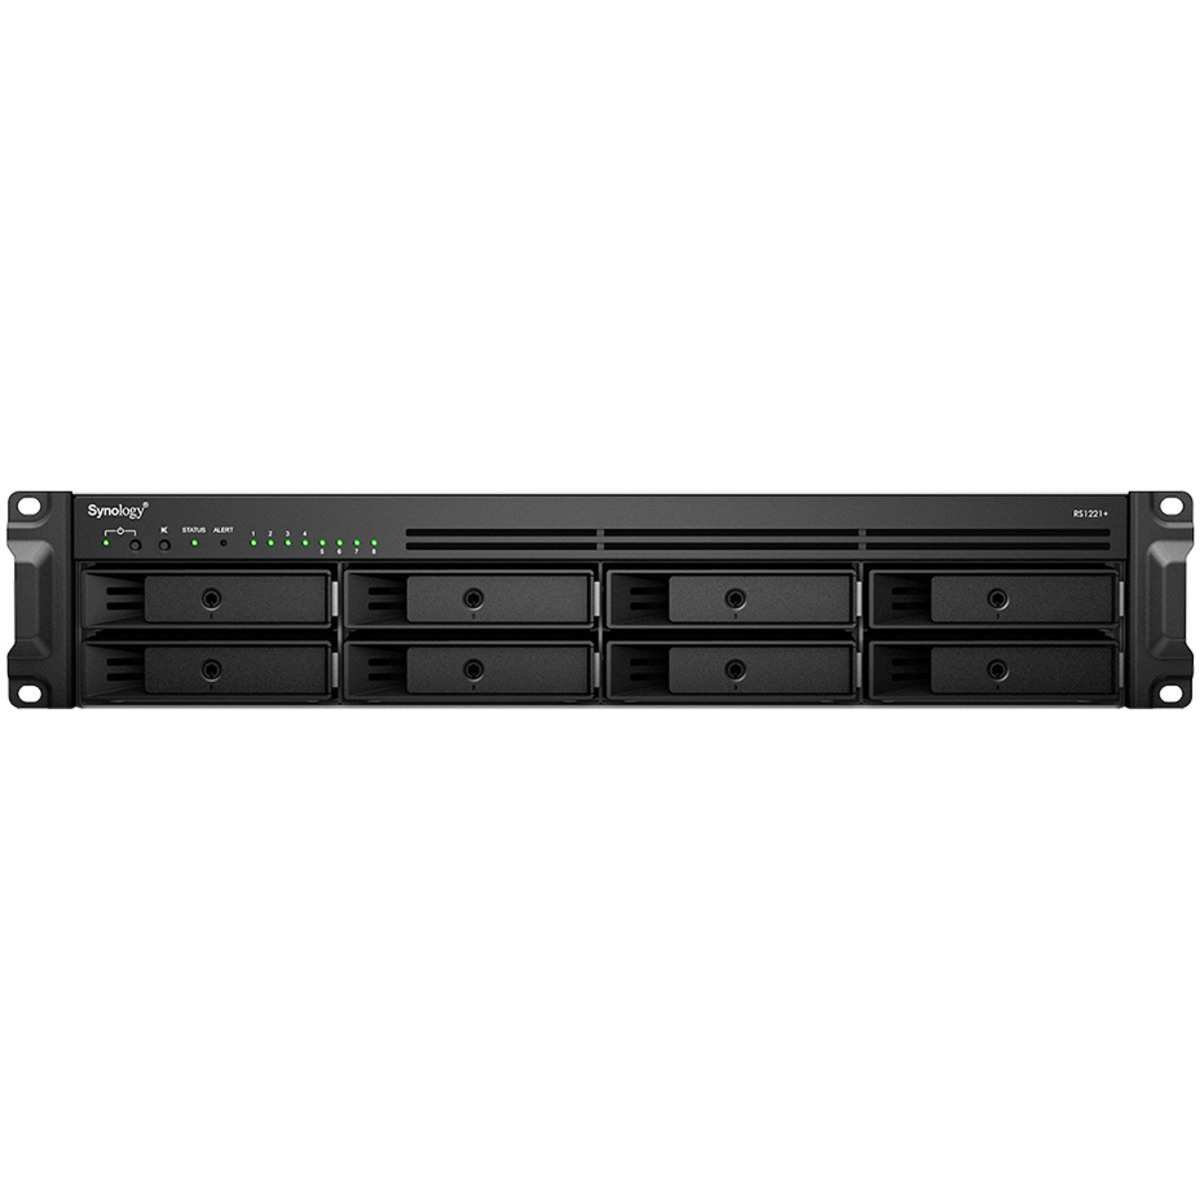 buy $3495 Synology RackStation RS1221RP+ 64tb RackMount NAS - Network Attached Storage Device 8x8000gb Seagate BarraCuda ST8000DM004 3.5 5400rpm SATA 6Gb/s HDD CONSUMER Class Drives Installed - Burn-In Tested - nas headquarters buy network attached storage server device das new raid-5 free shipping usa christmas new year holiday sale RackStation RS1221RP+